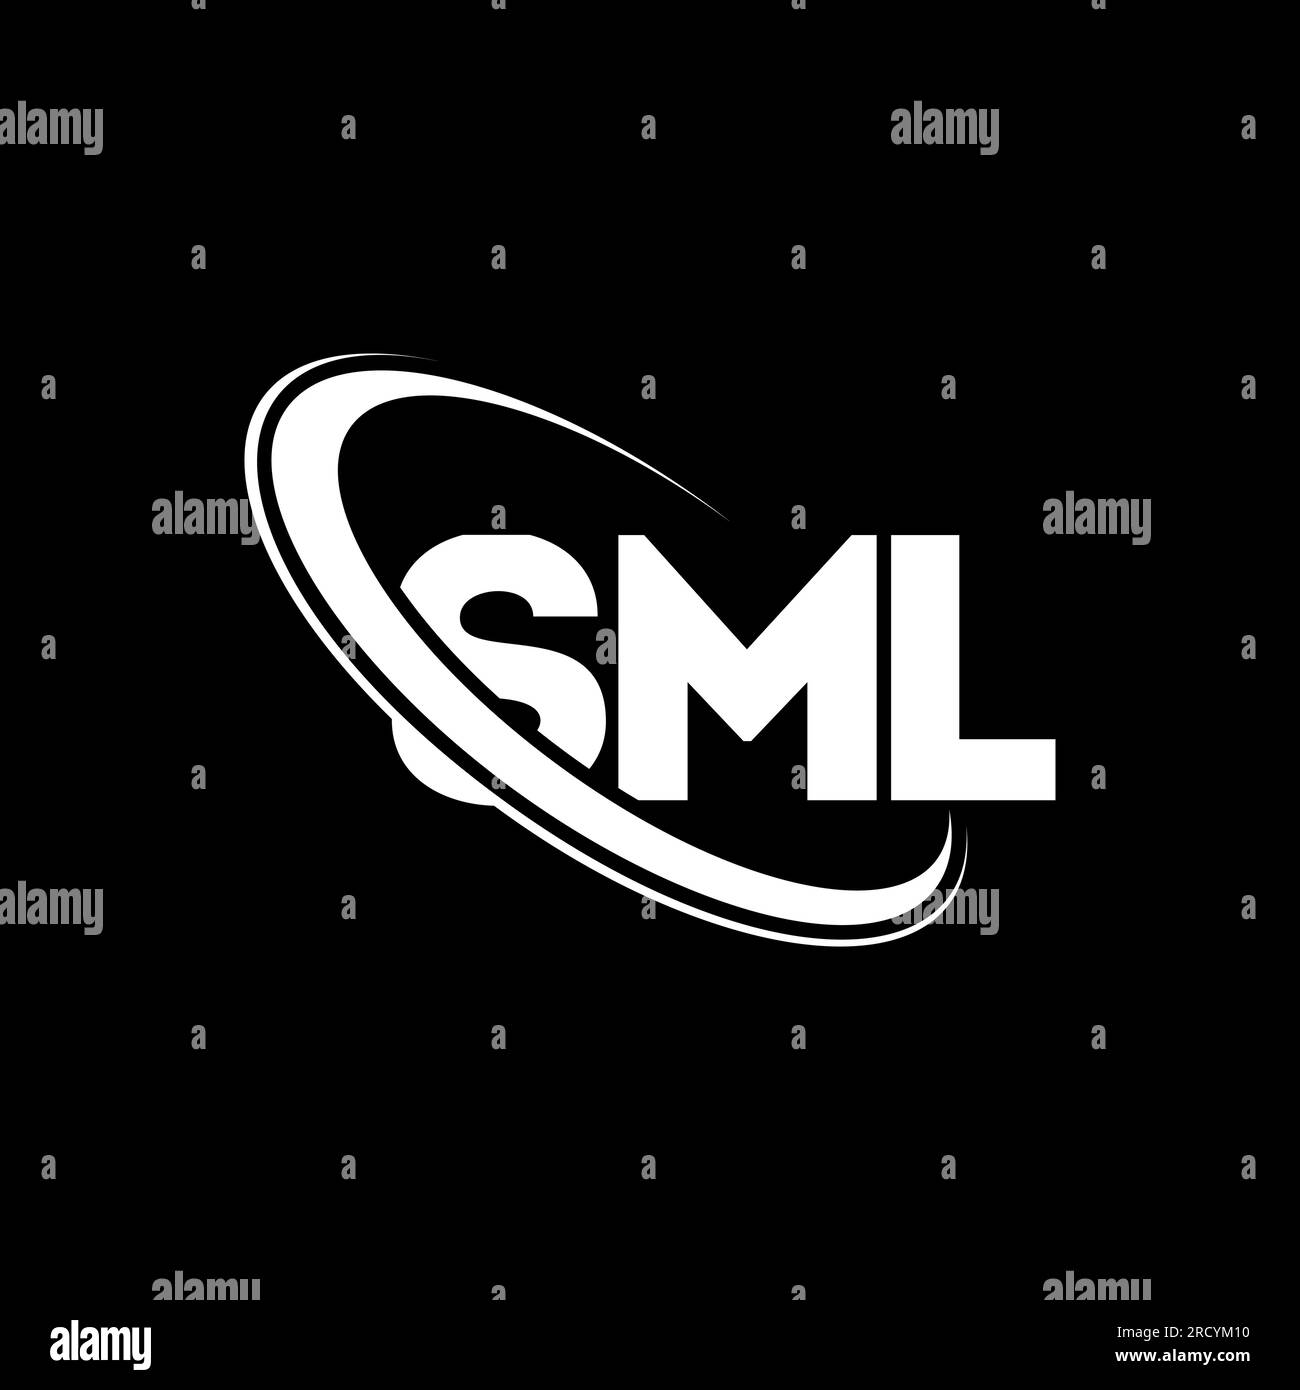 SML logo. SML letter. SML letter logo design. Initials SML logo linked with circle and uppercase monogram logo. SML typography for technology, busines Stock Vector